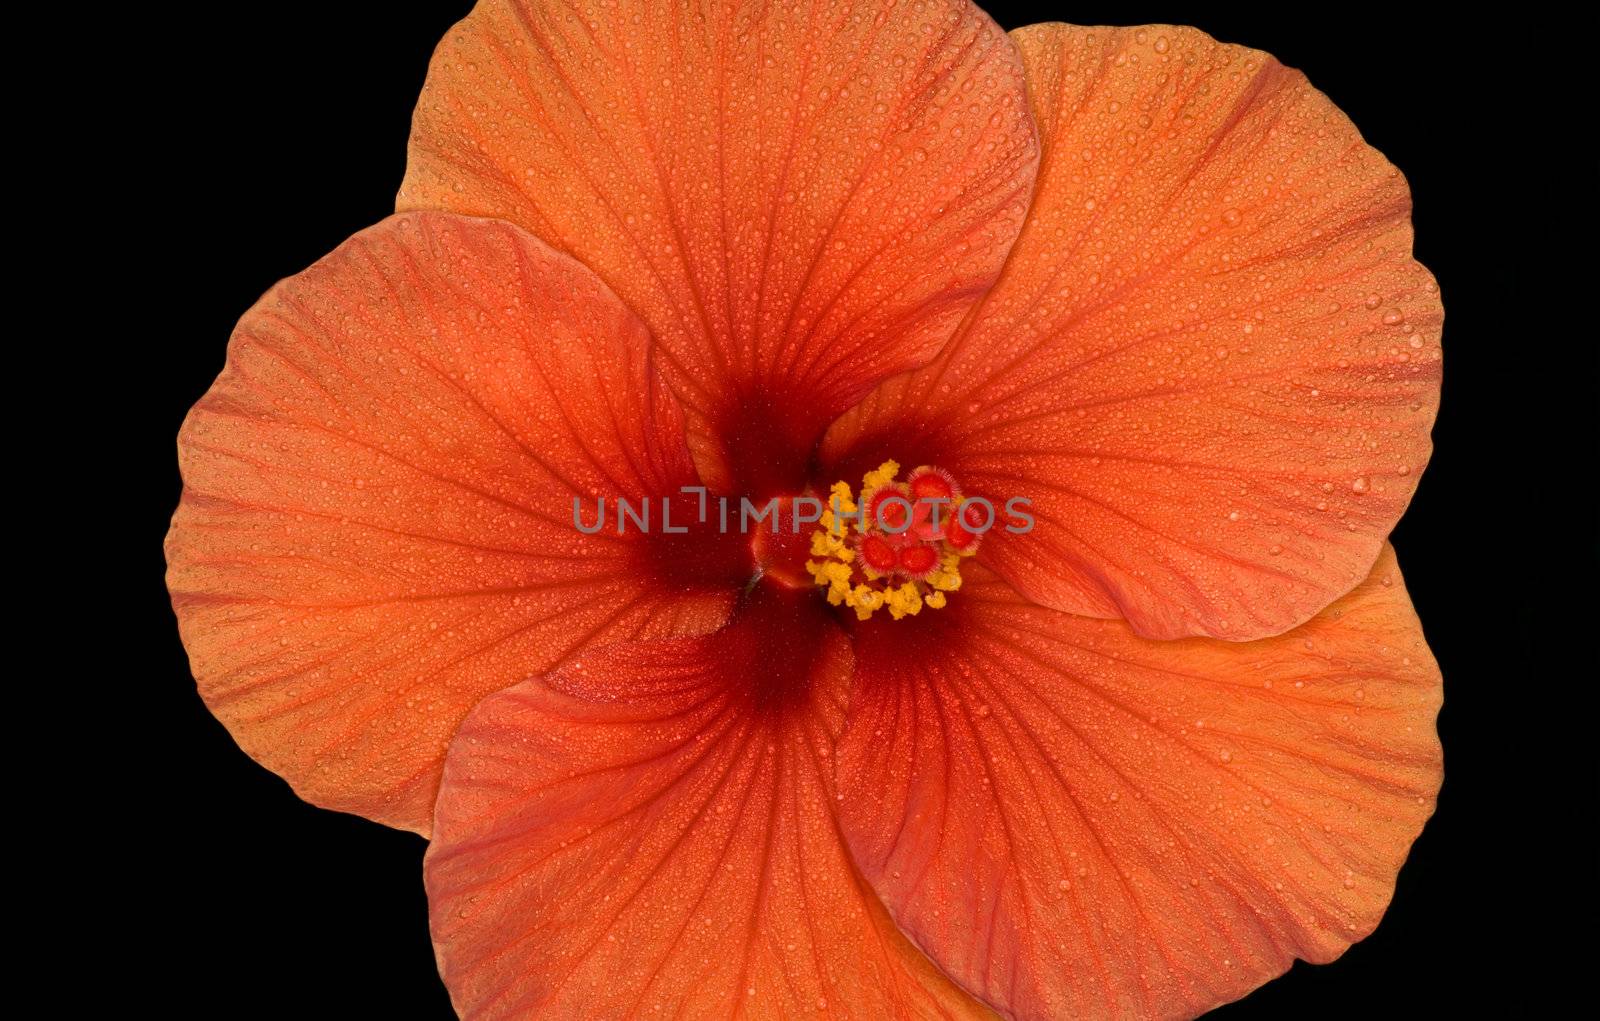 Flower of the hibiscus on black background.  The Petal cover dewdrop.